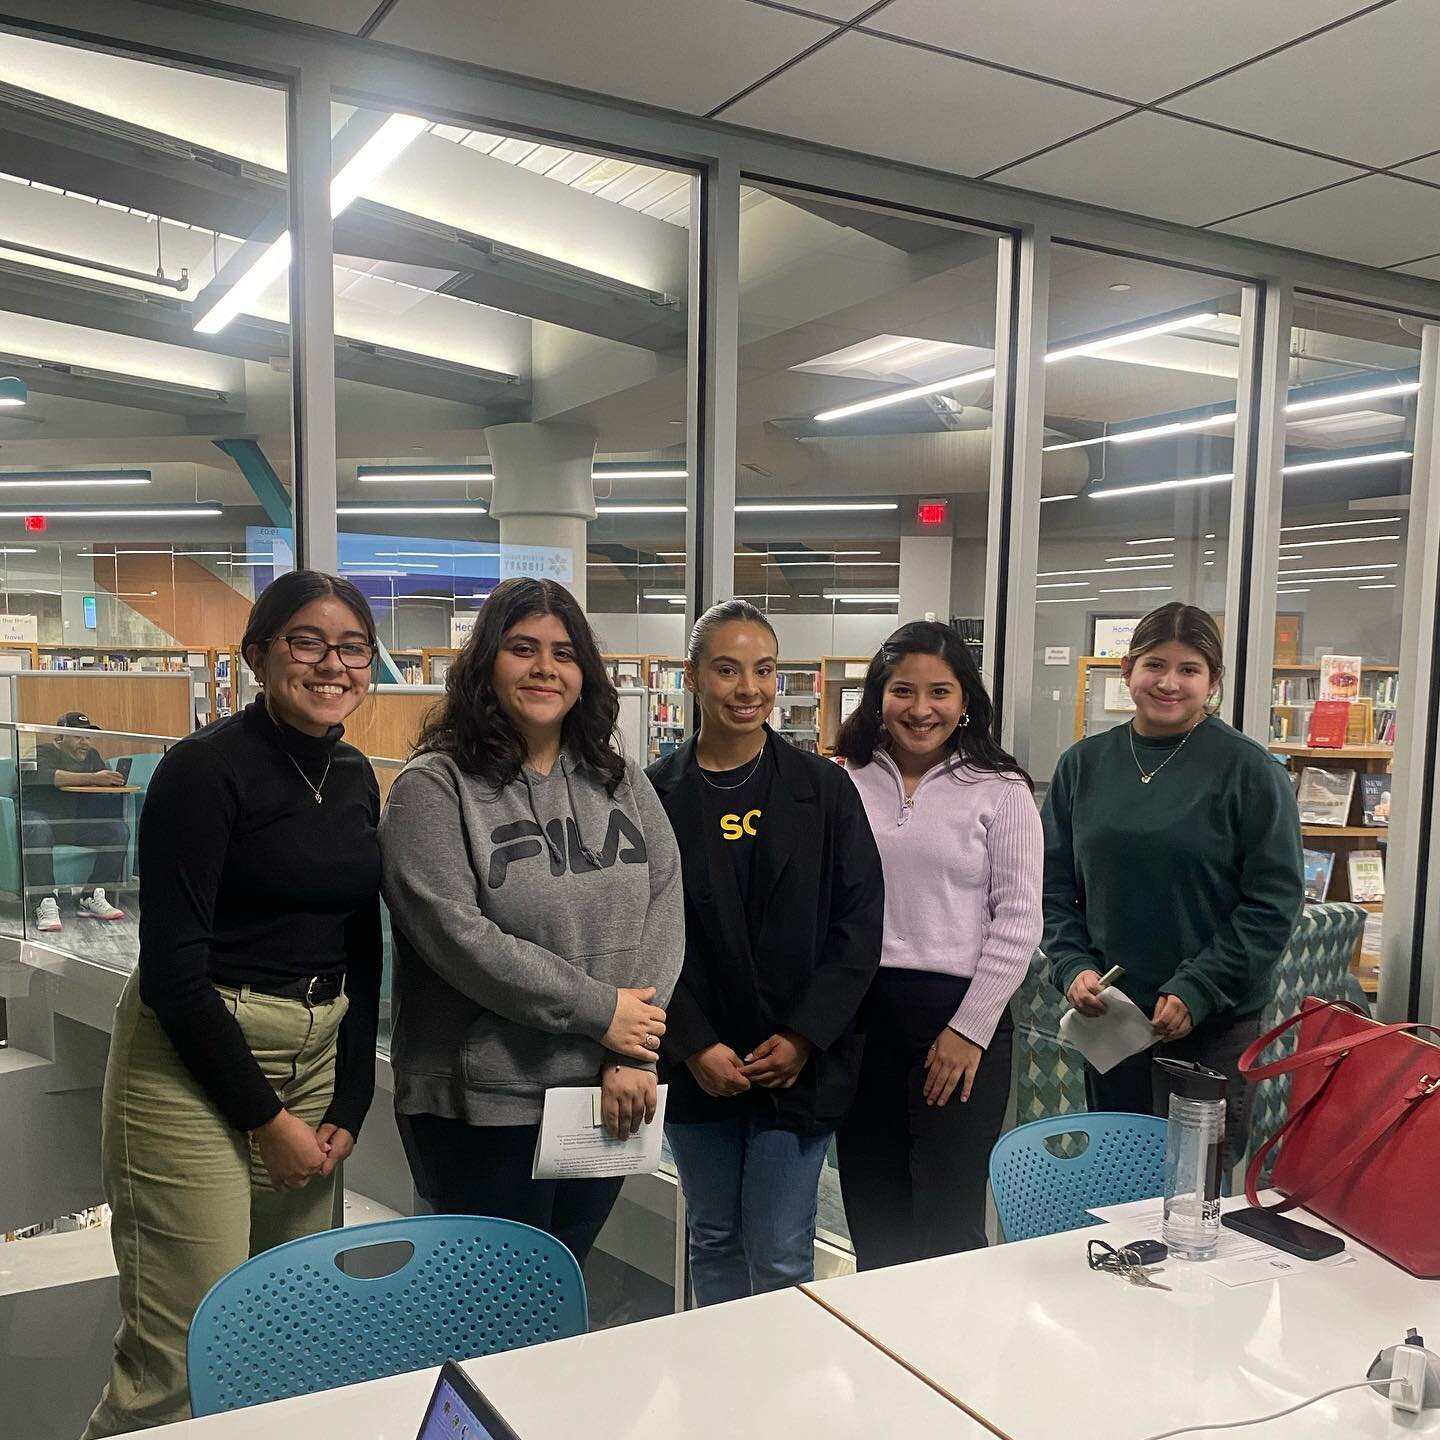 Yesterday we held a volunteer orientation and welcomed some new volunteers to the Somos First-Gen team! 
We are so excited to have passionate individuals ready to make an impact on first-gen students 💙